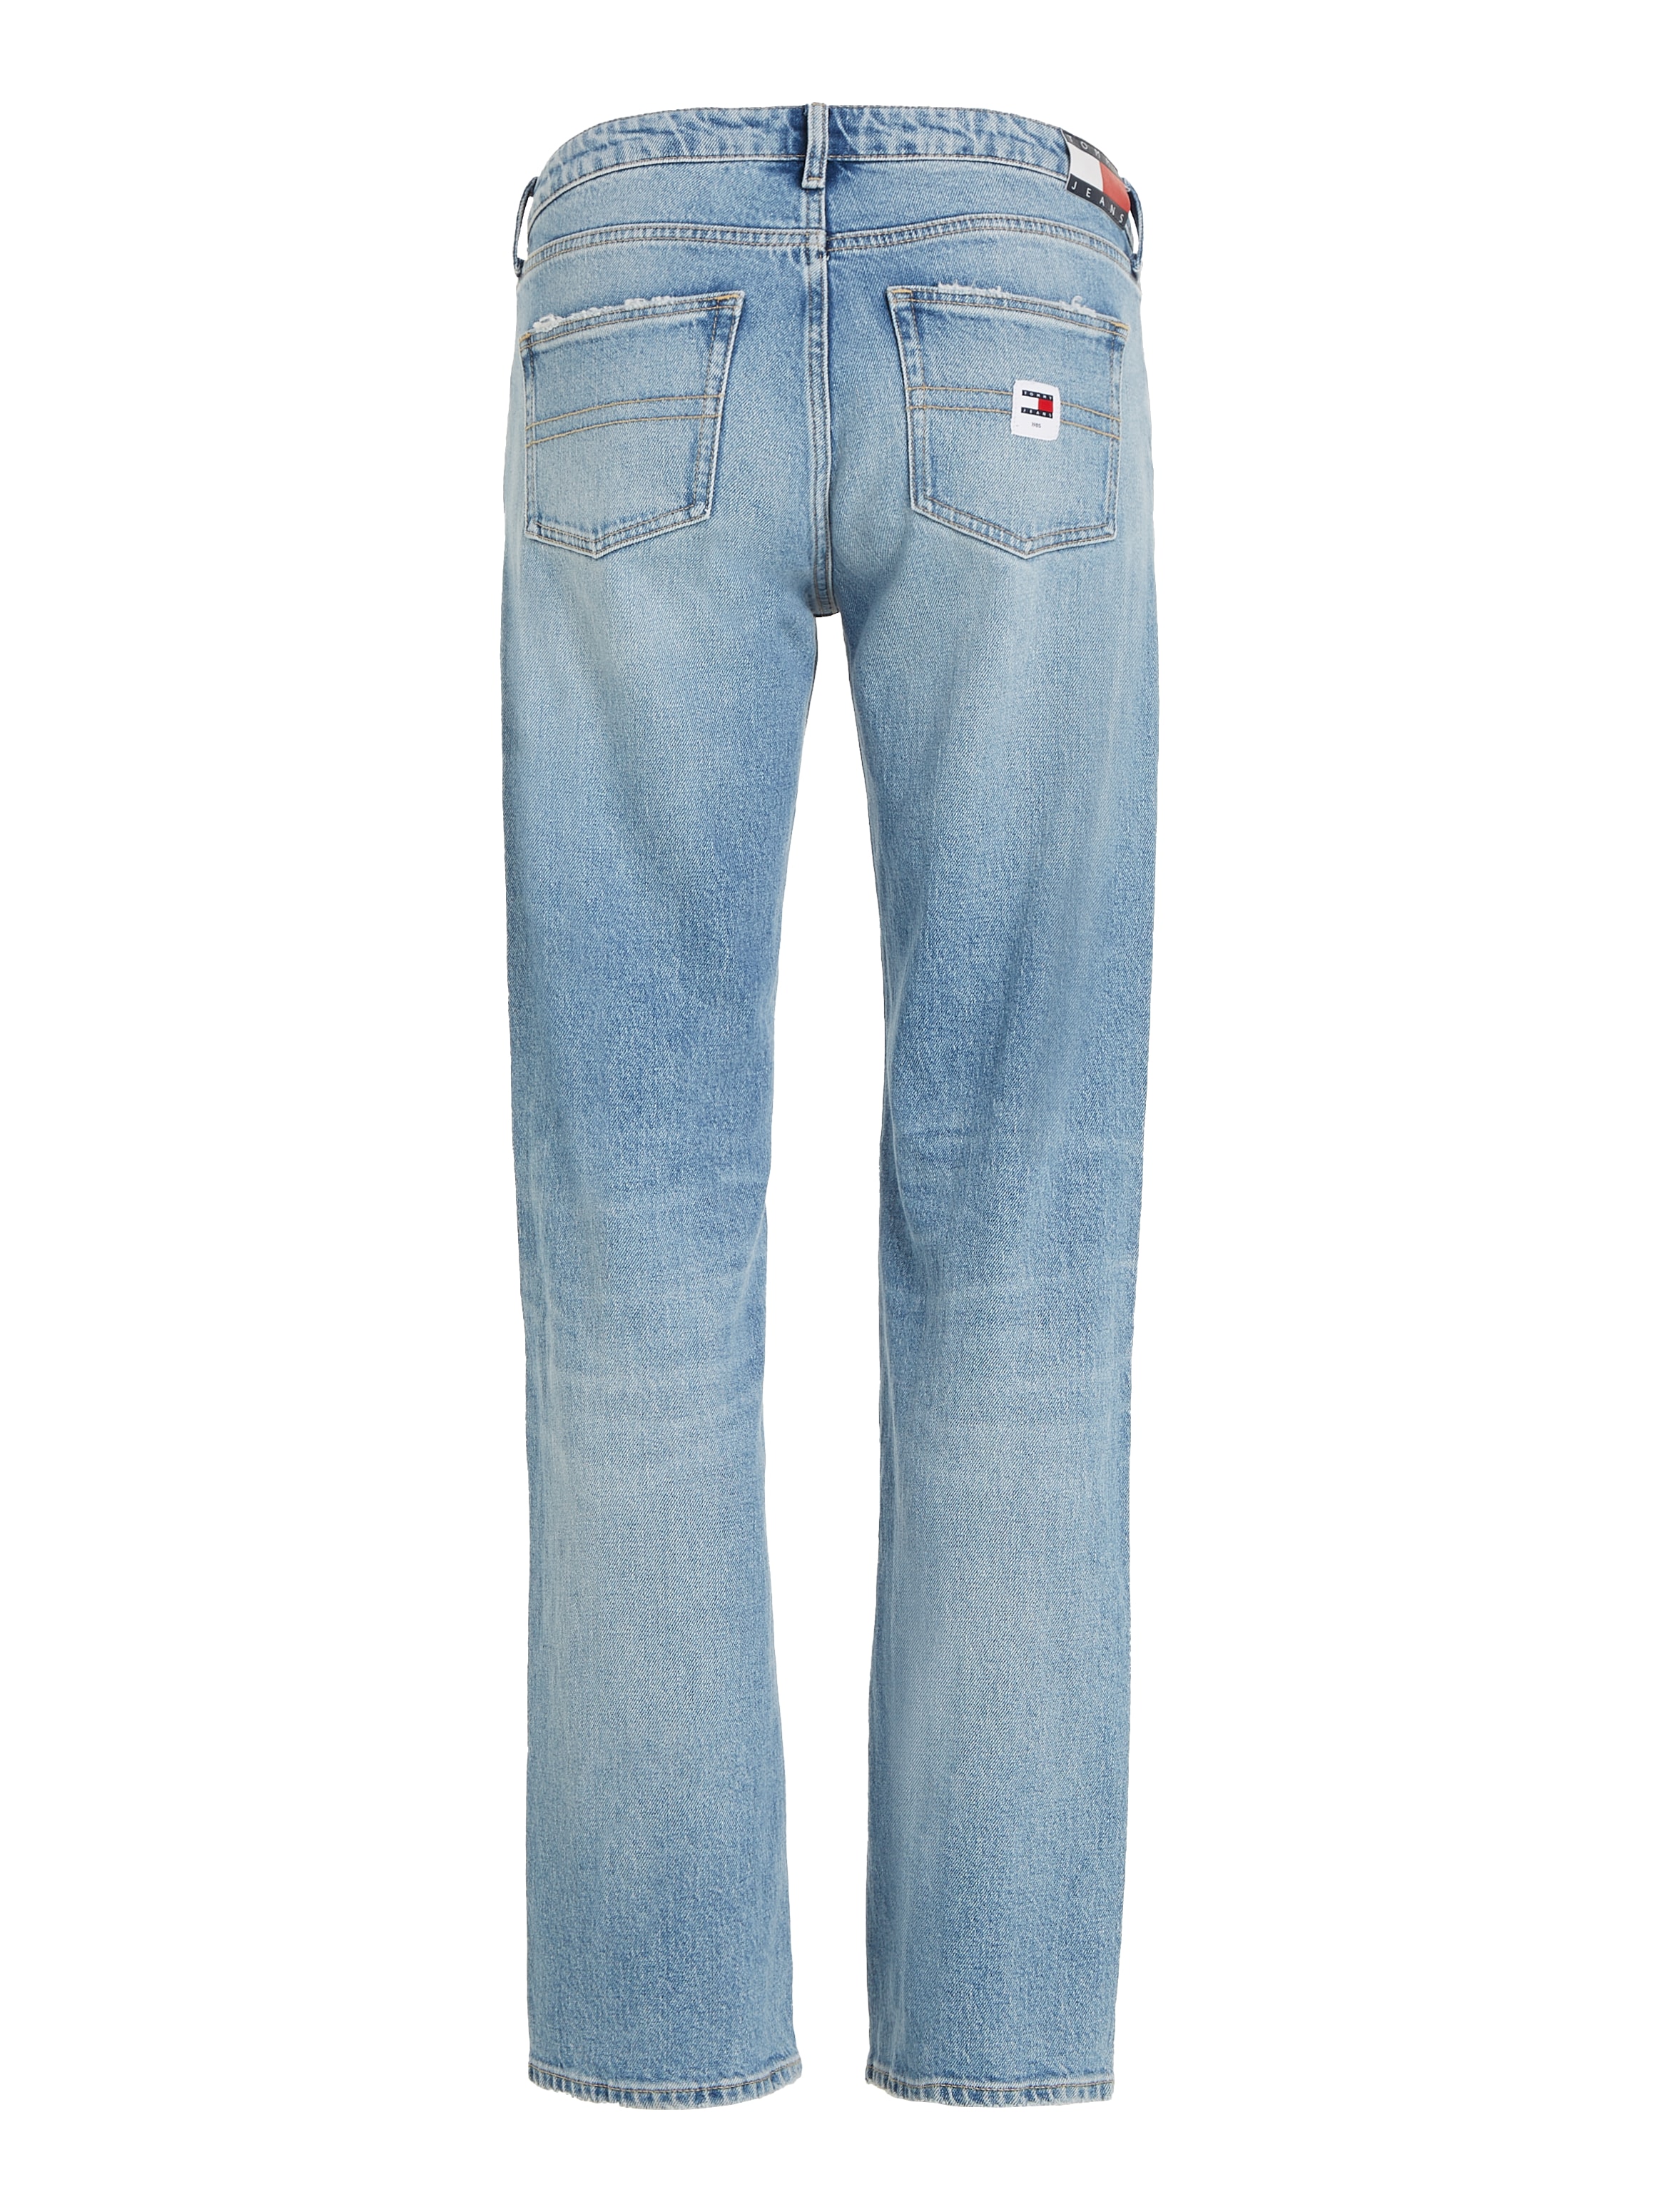 Tommy Jeans Straight-Jeans LW BH4116«, bei STR Flag mit »SOPHIE ♕ Jeans Logo-Badge & Tommy